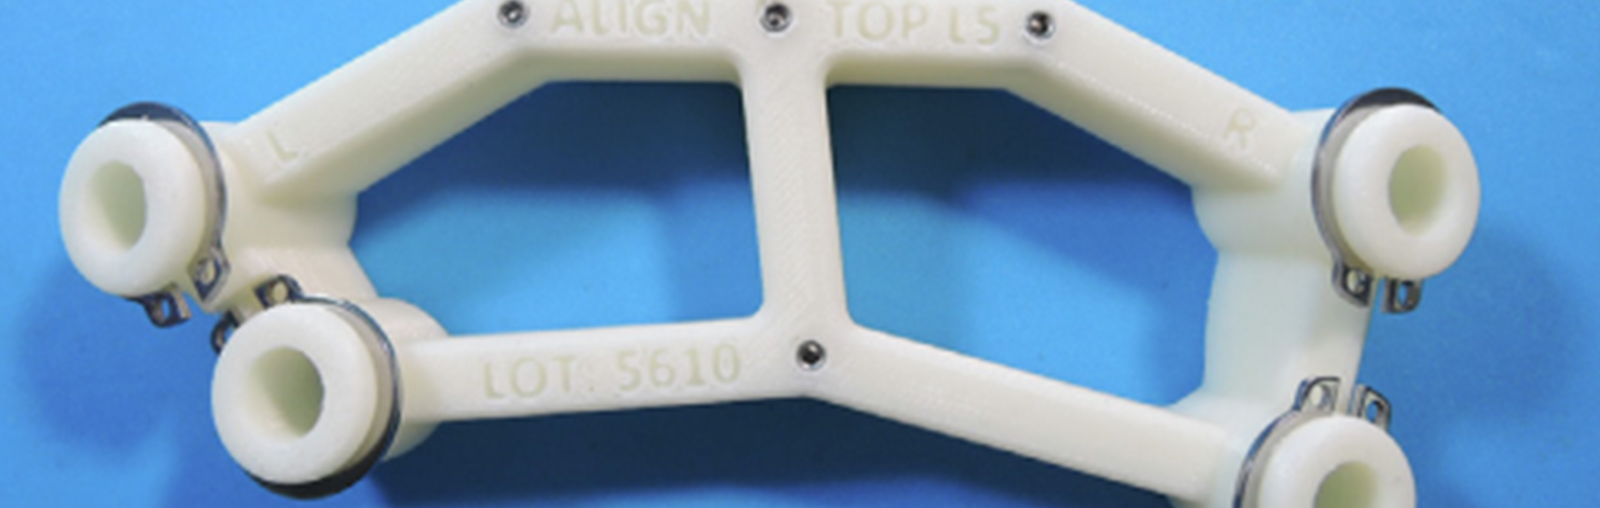 Anatomics Proves Viability Of 3d Printed Surgical Guides